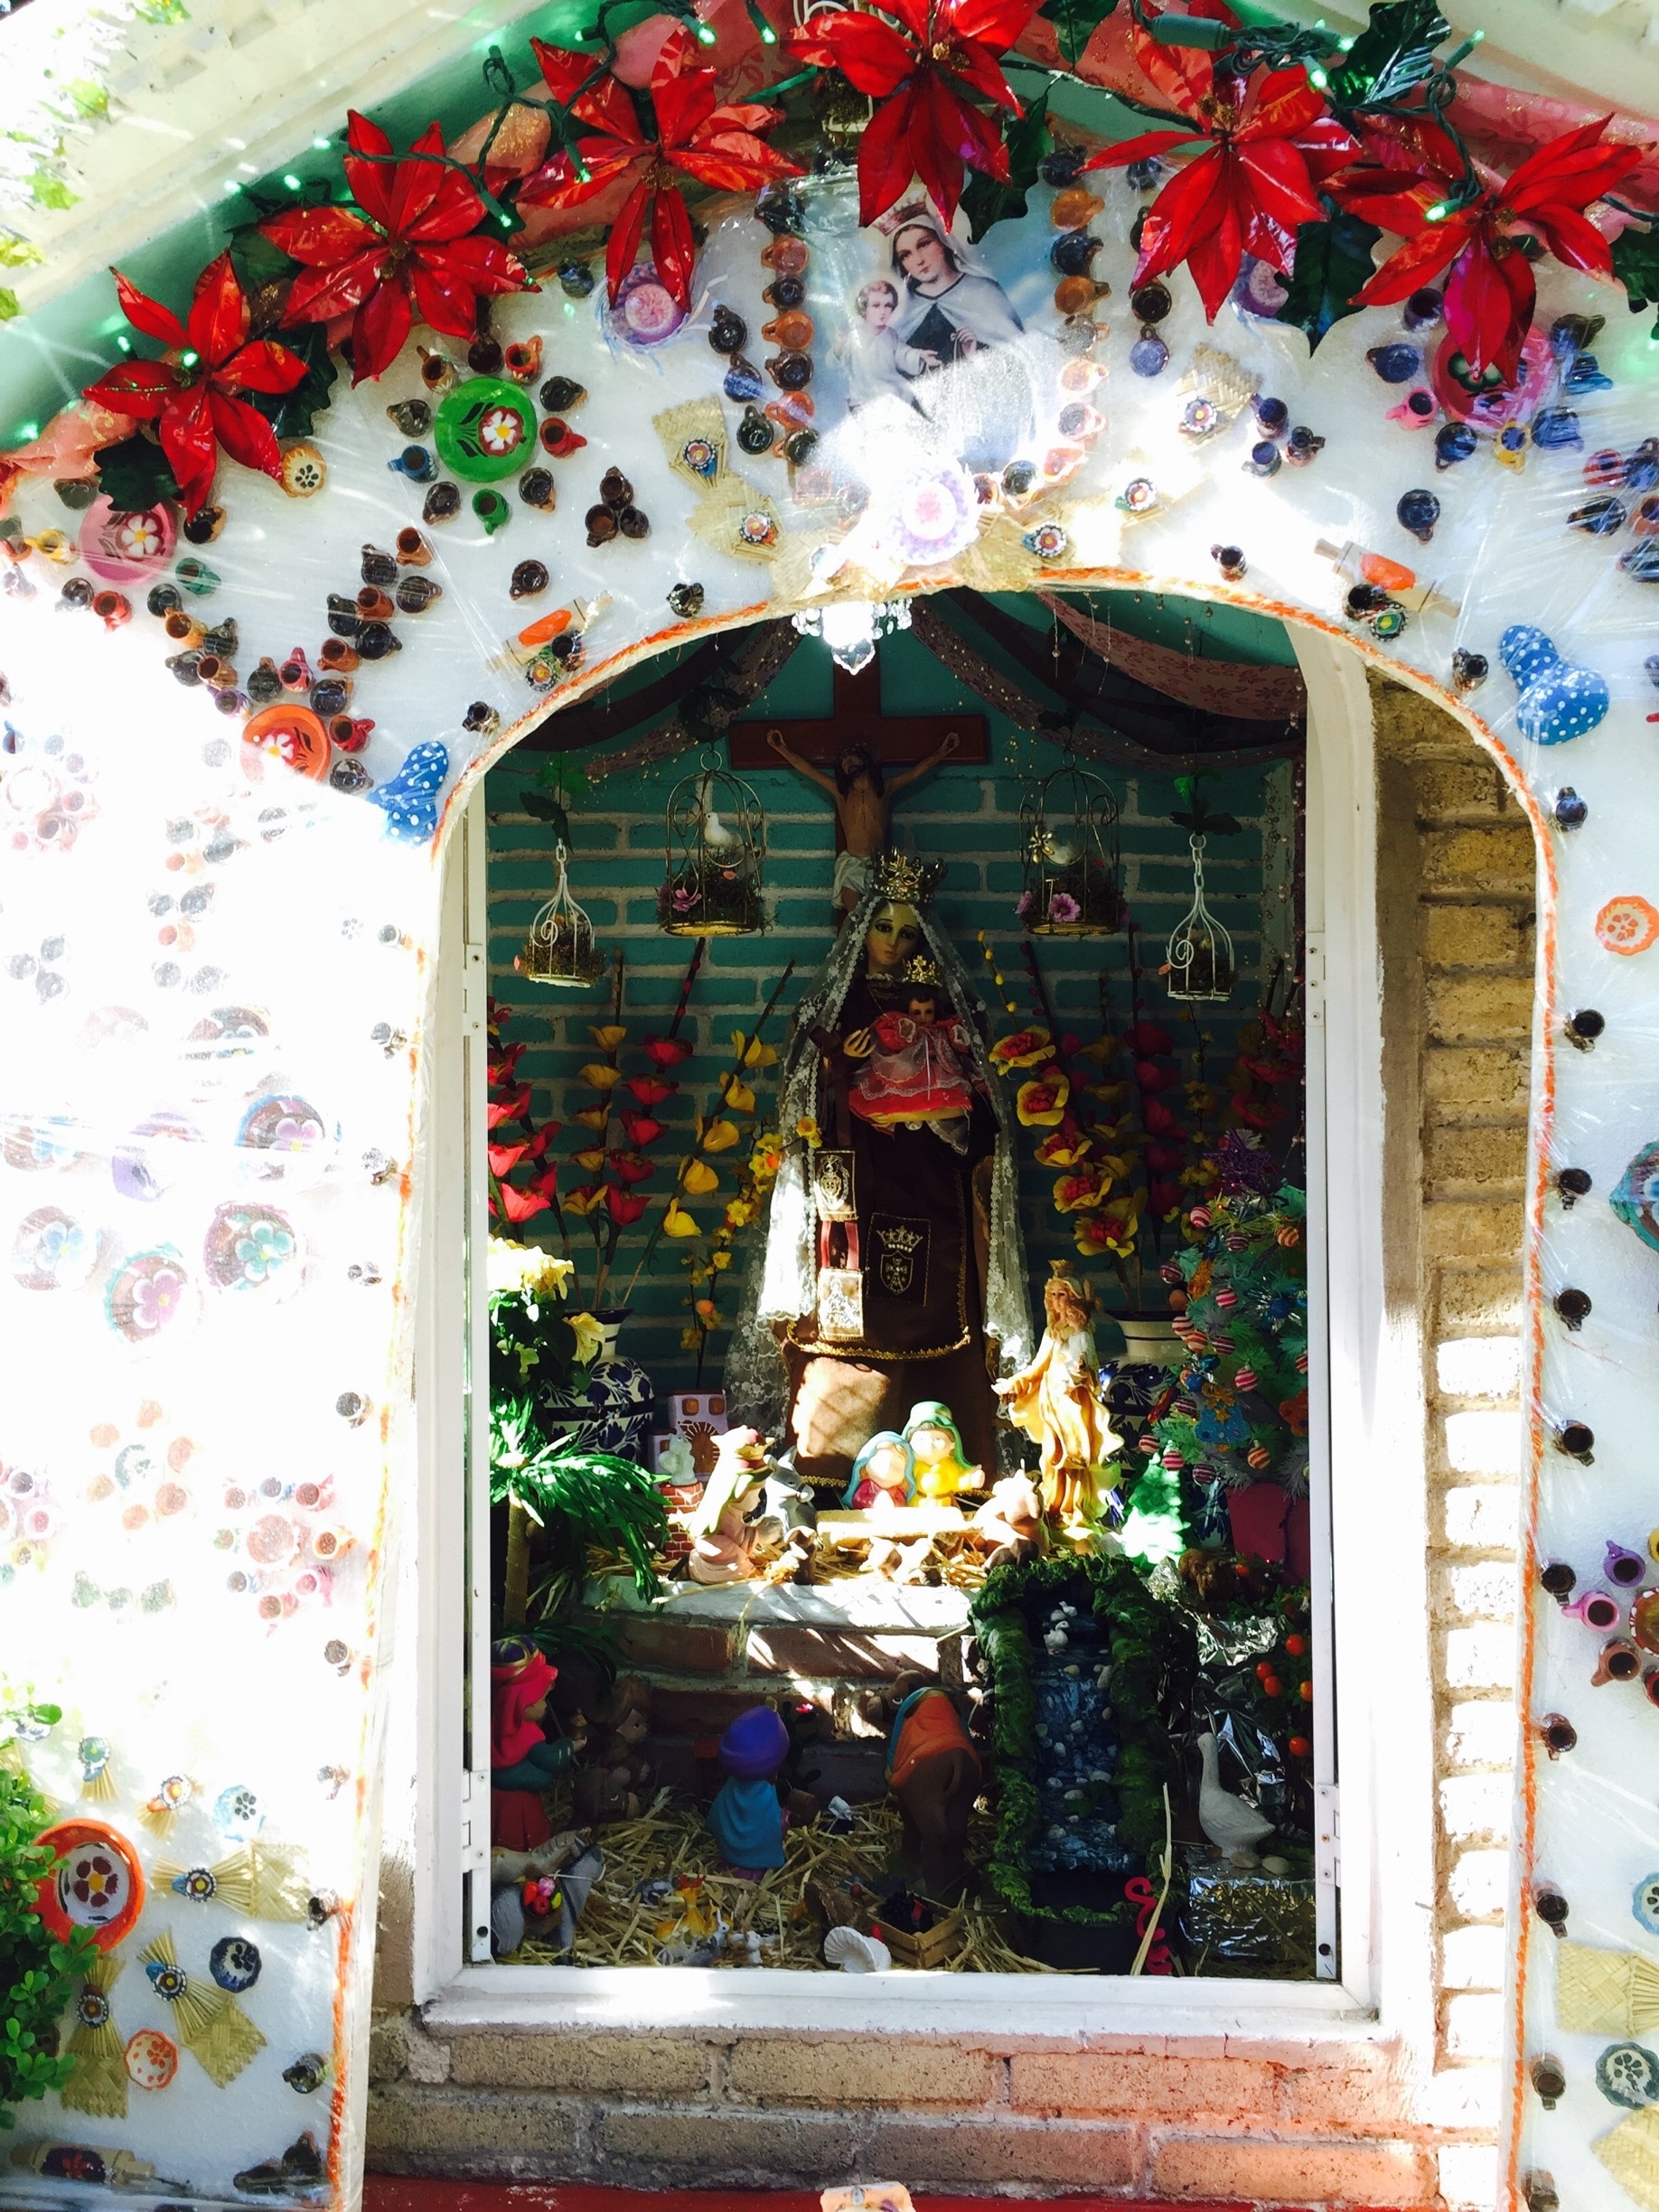  
A nice and colourful altar 

Find more pics in >> the HolyList

#outdoors #religion #devotion #tradition #travel #troveon #mexico #virgin #altar 